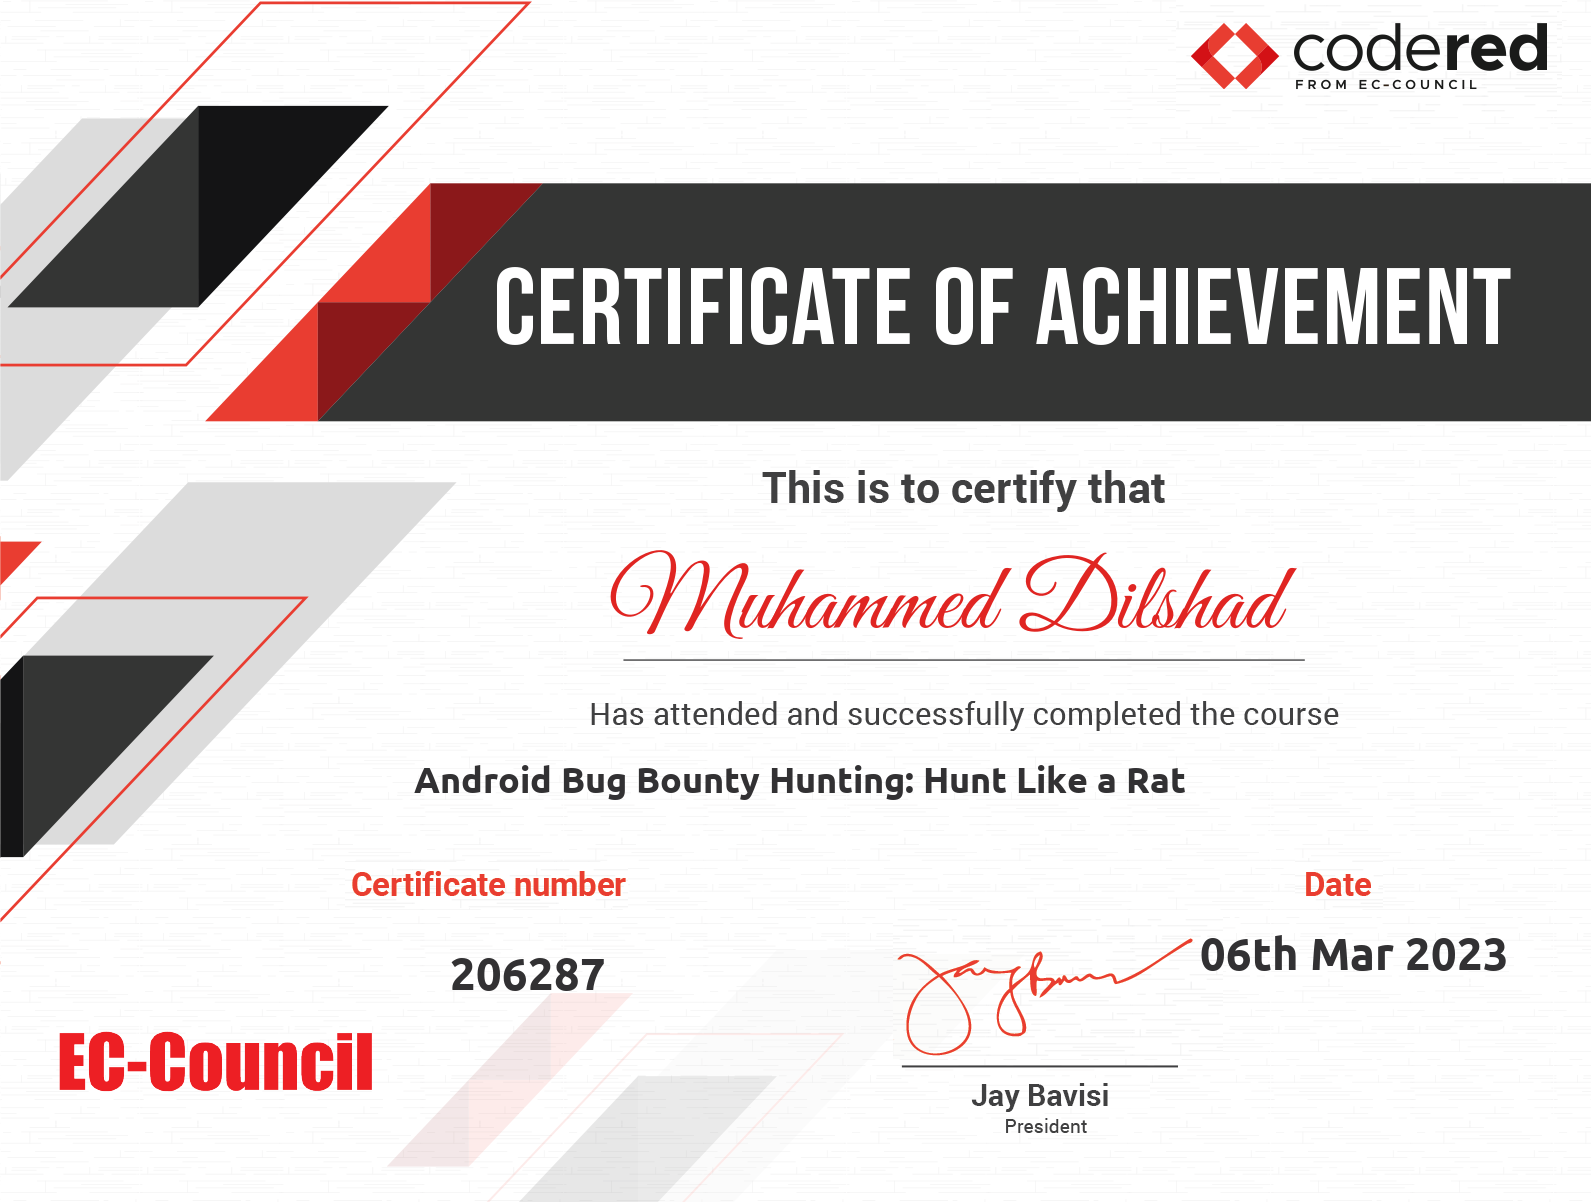 couNciL

> CERTIFICATE OF ACHIEVEMENT

This is to certify that

# O)Nlitemmed Dilstad

Has attended and successfully completed the course
Android Bug Bounty Hunting: Hunt Like a Rat
Certificate number Date

206287 SE Mar 2023

Jay Bavisi

President